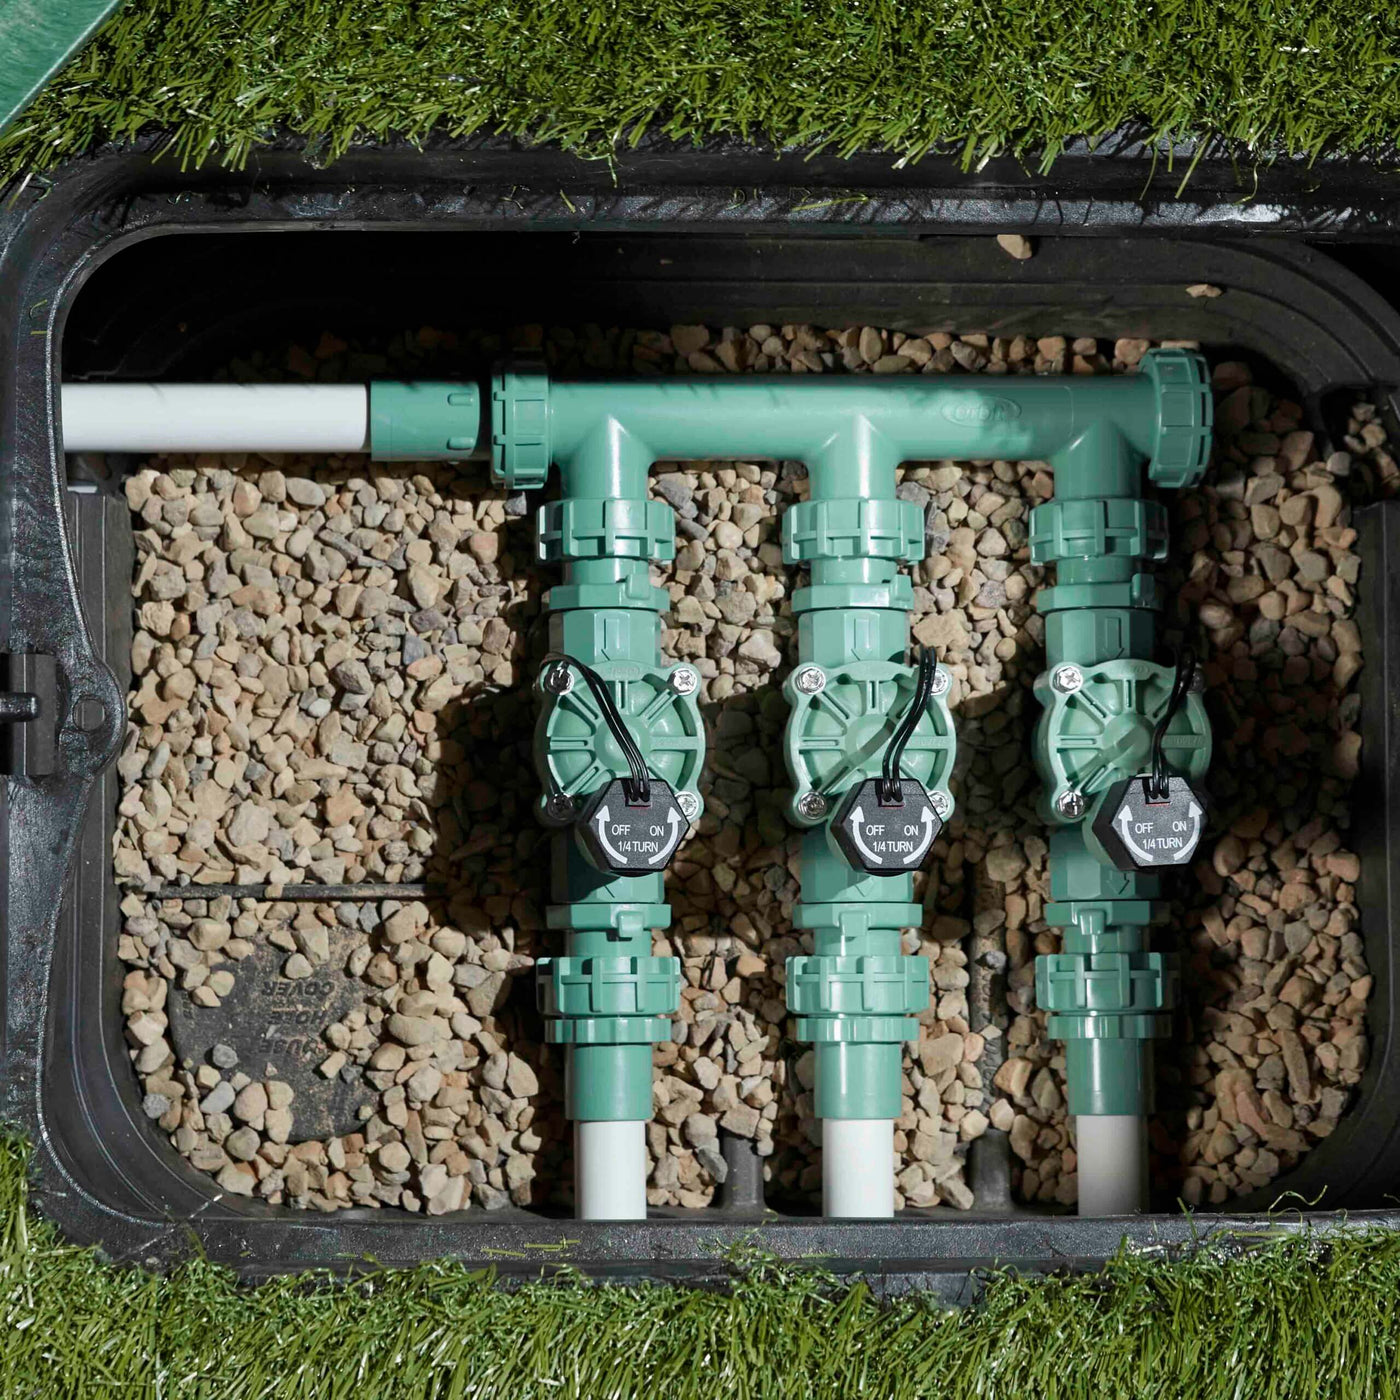 57253 -  Three valve preassembled sprinkler manifold. Pictured fully assembled in valve box. 